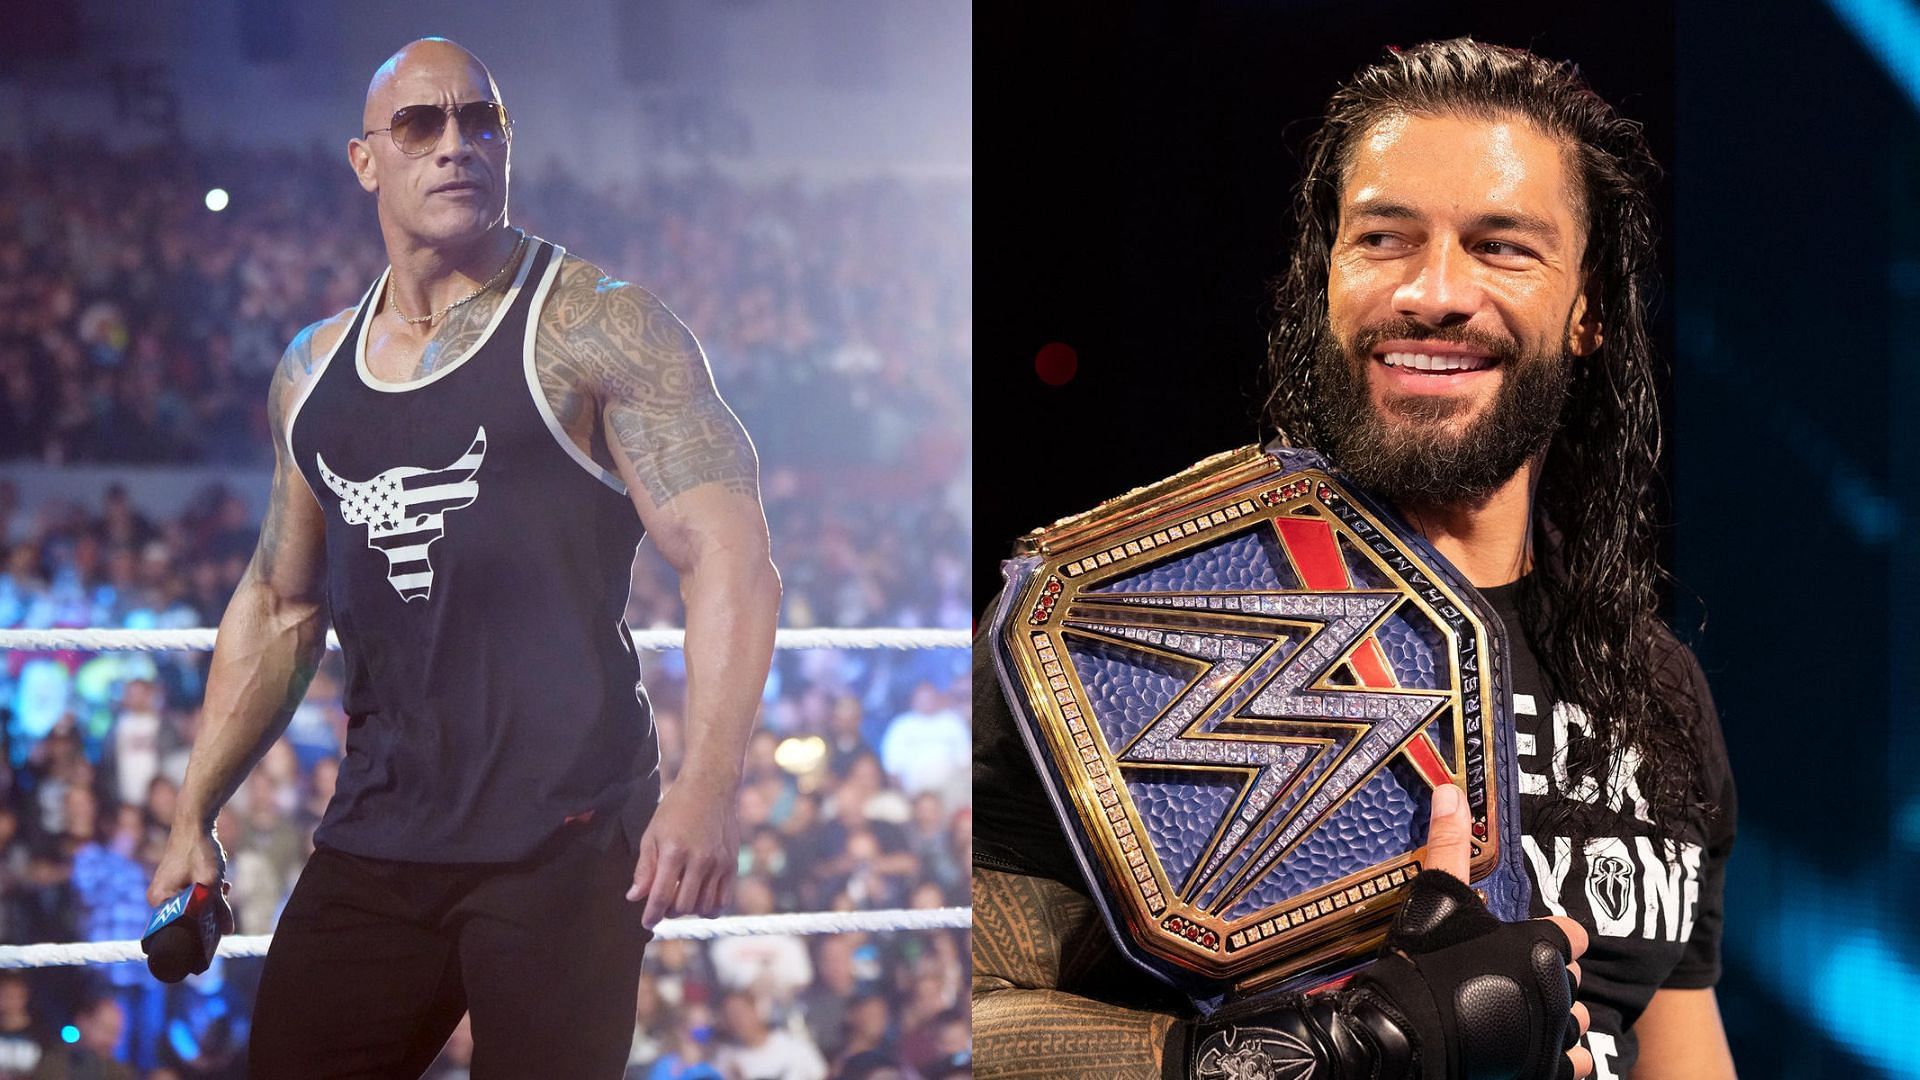 The Rock (left), Roman Reigns (right)